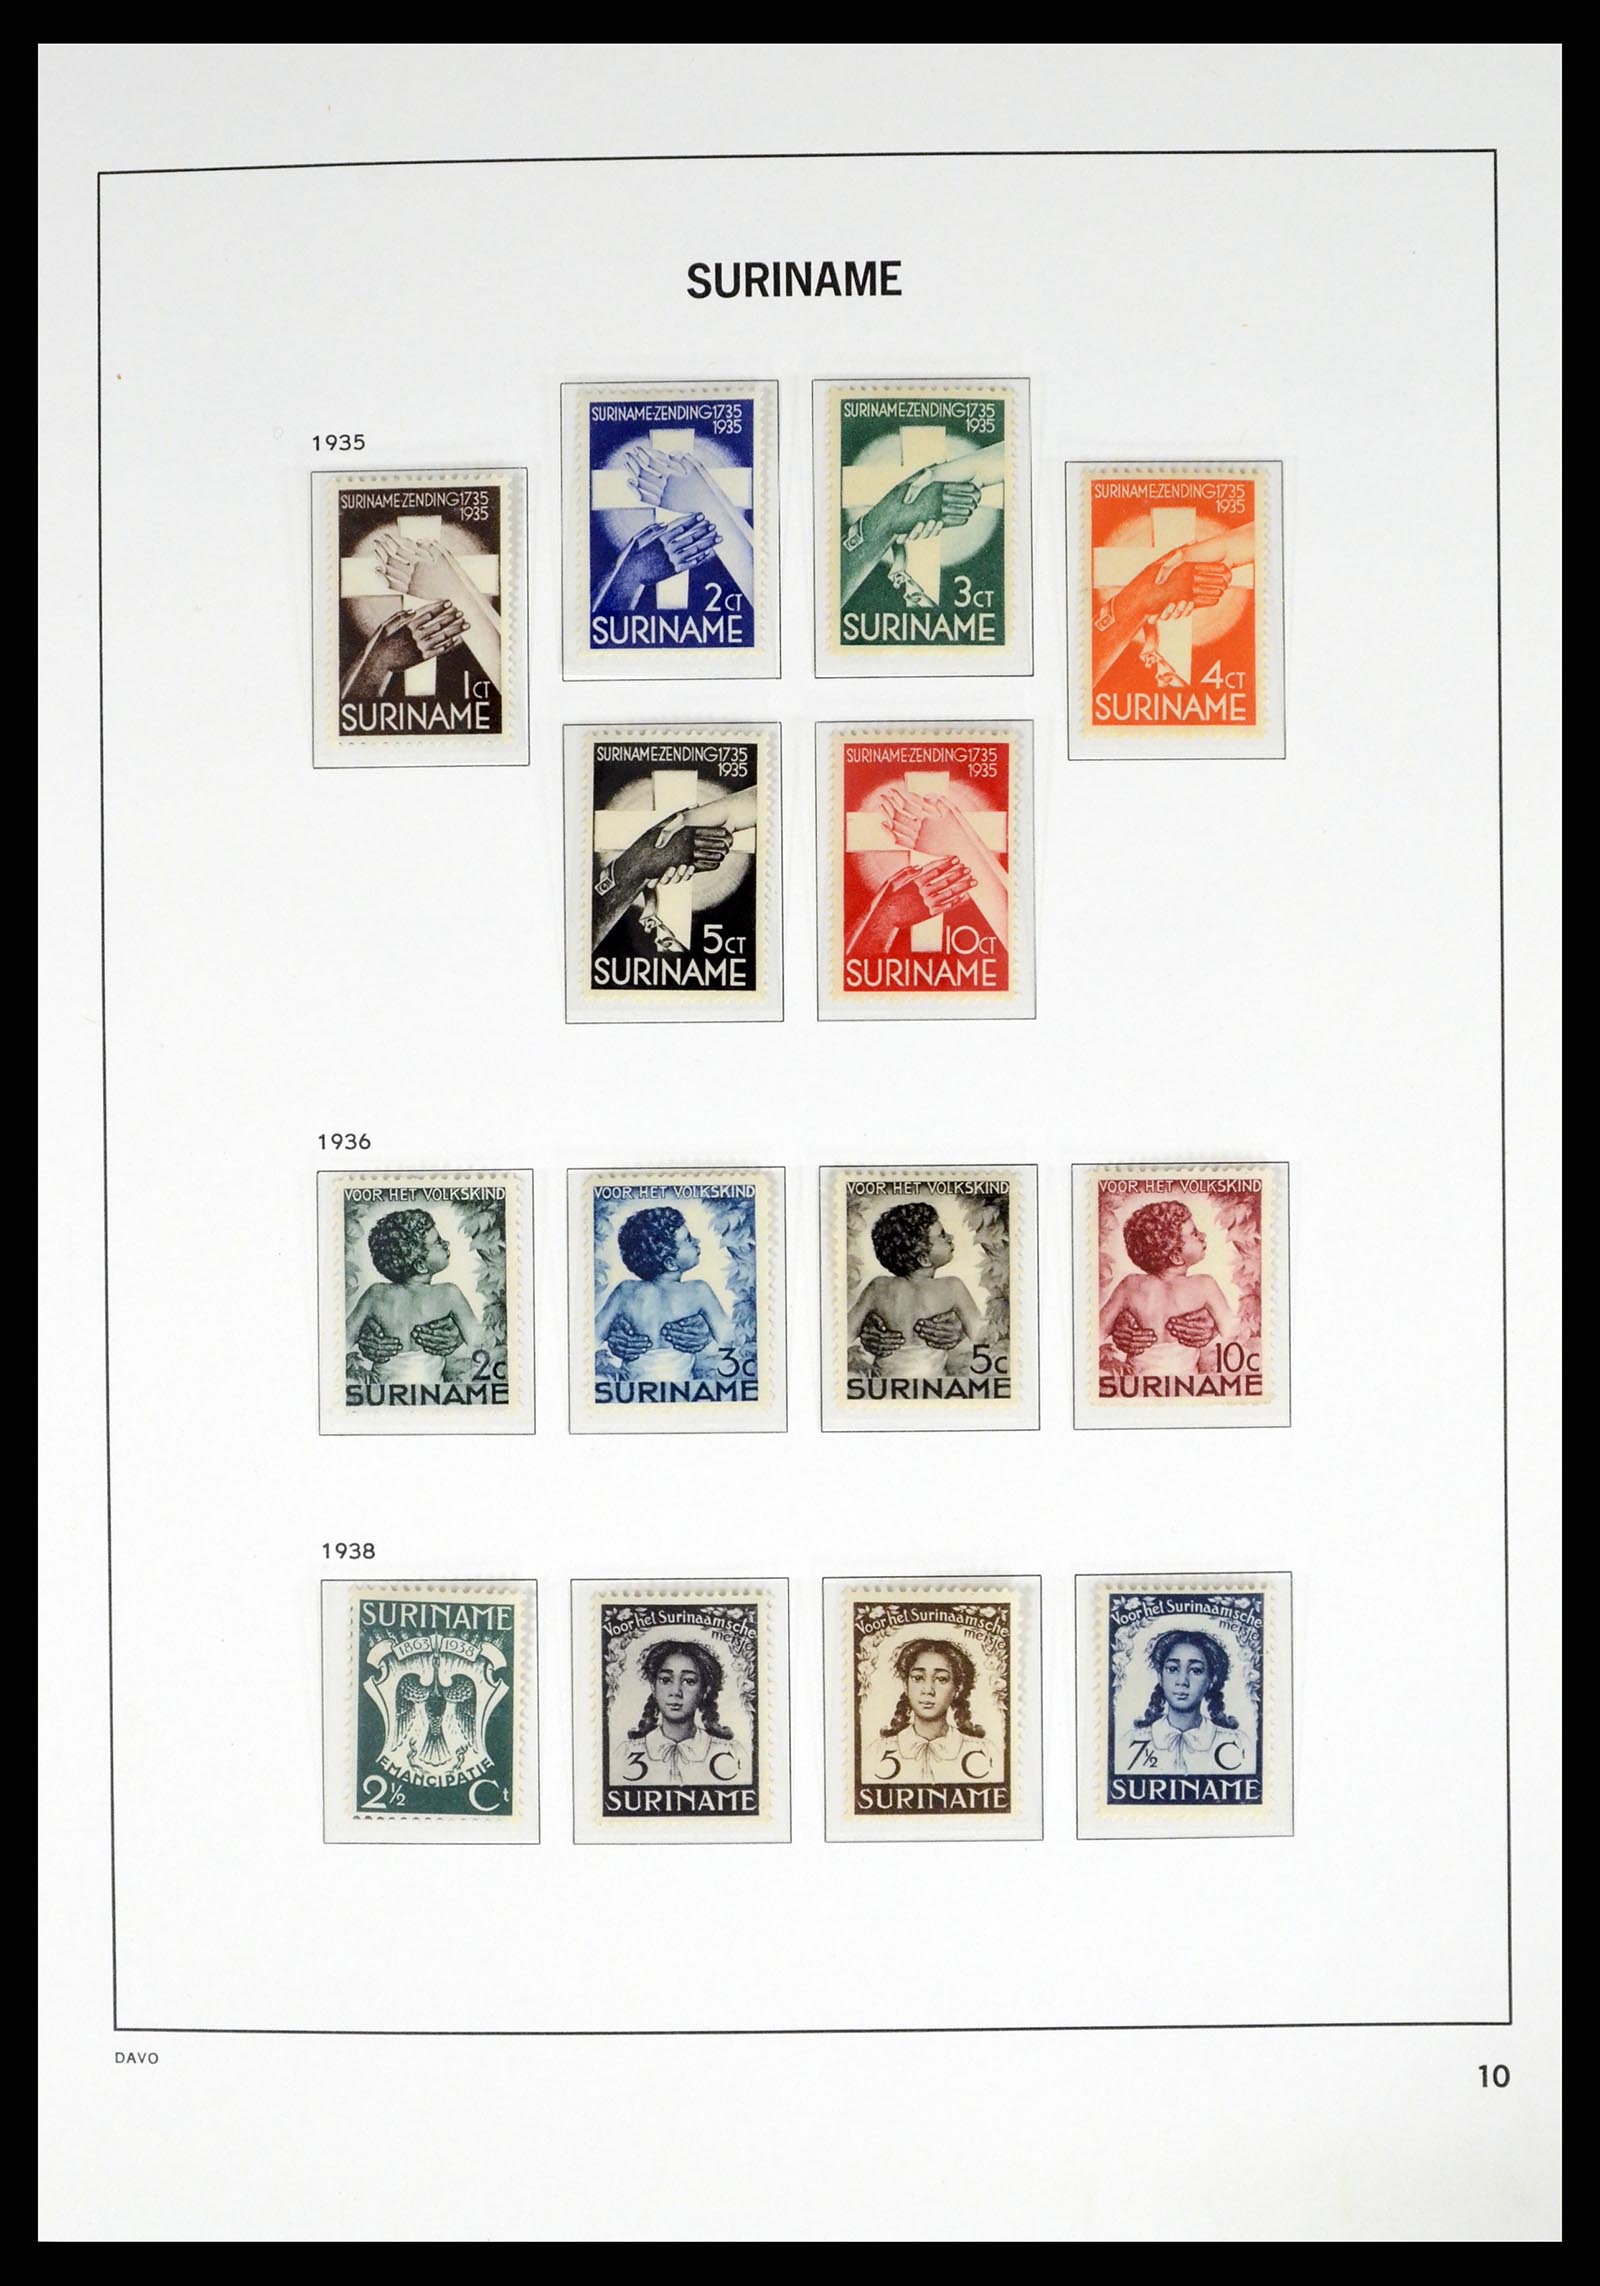 37421 010 - Stamp collection 37421 Suriname 1873-1975.